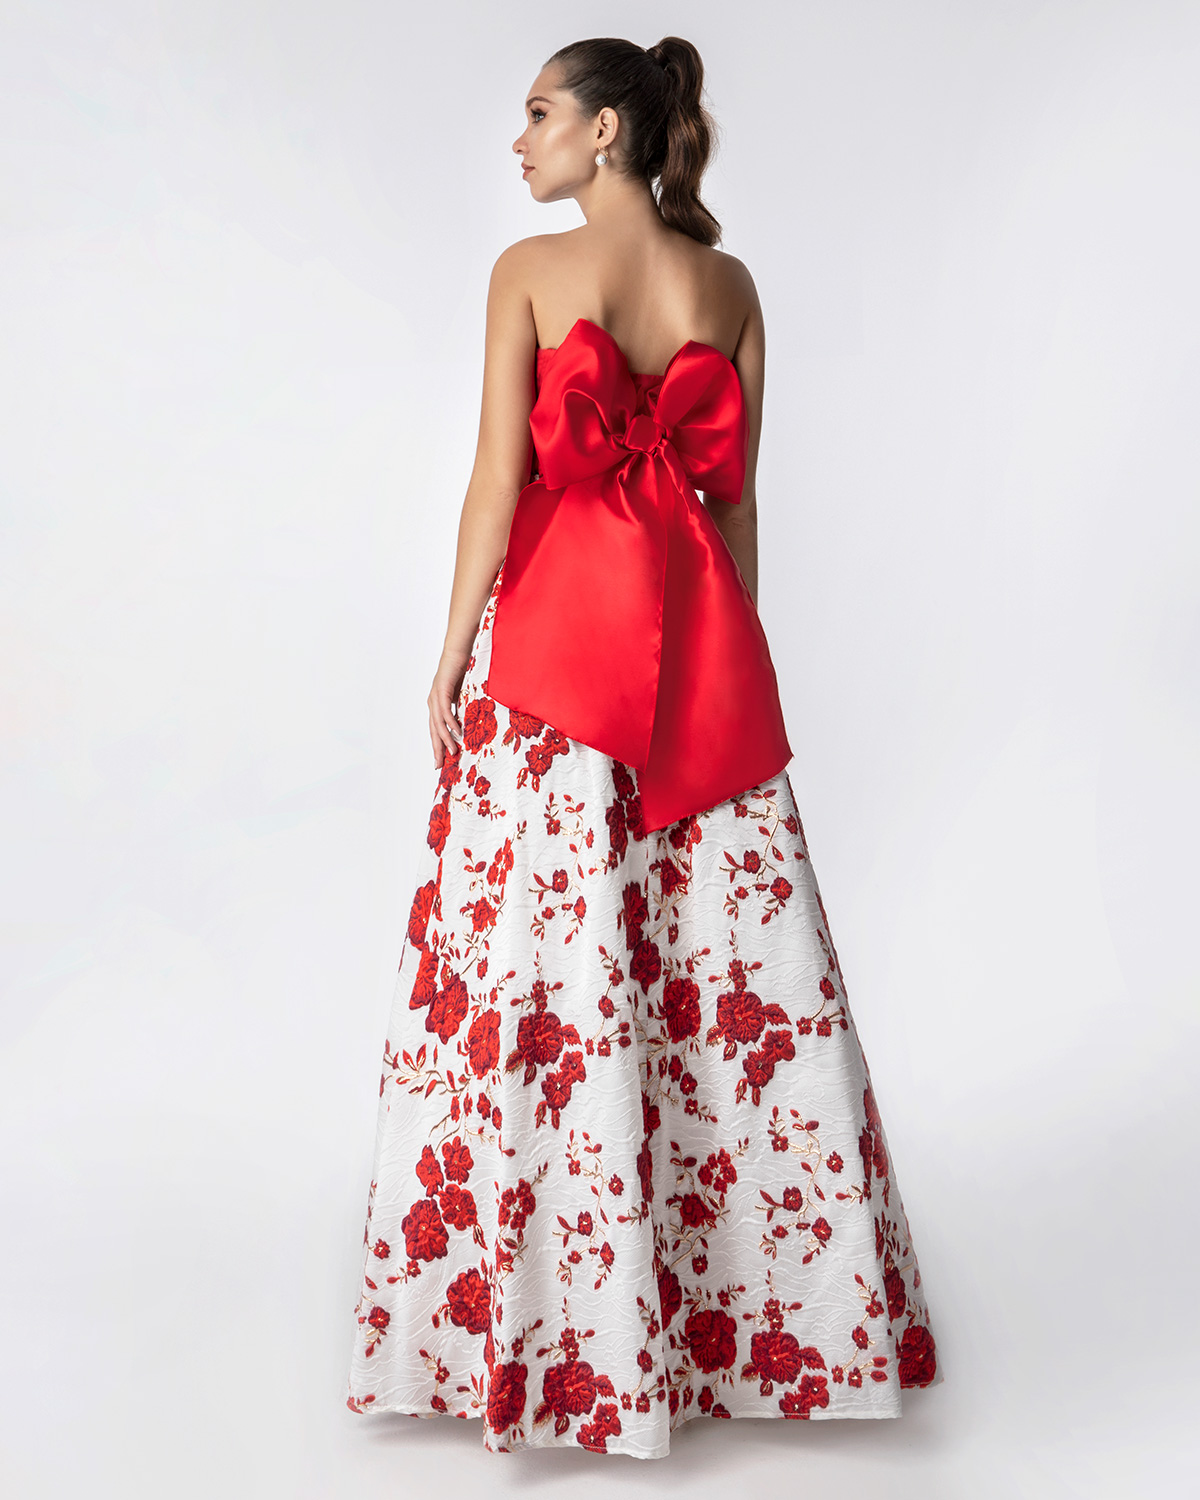 Cocktail Dresses / Long printed brocade skirt with solid color top and big bow in the back